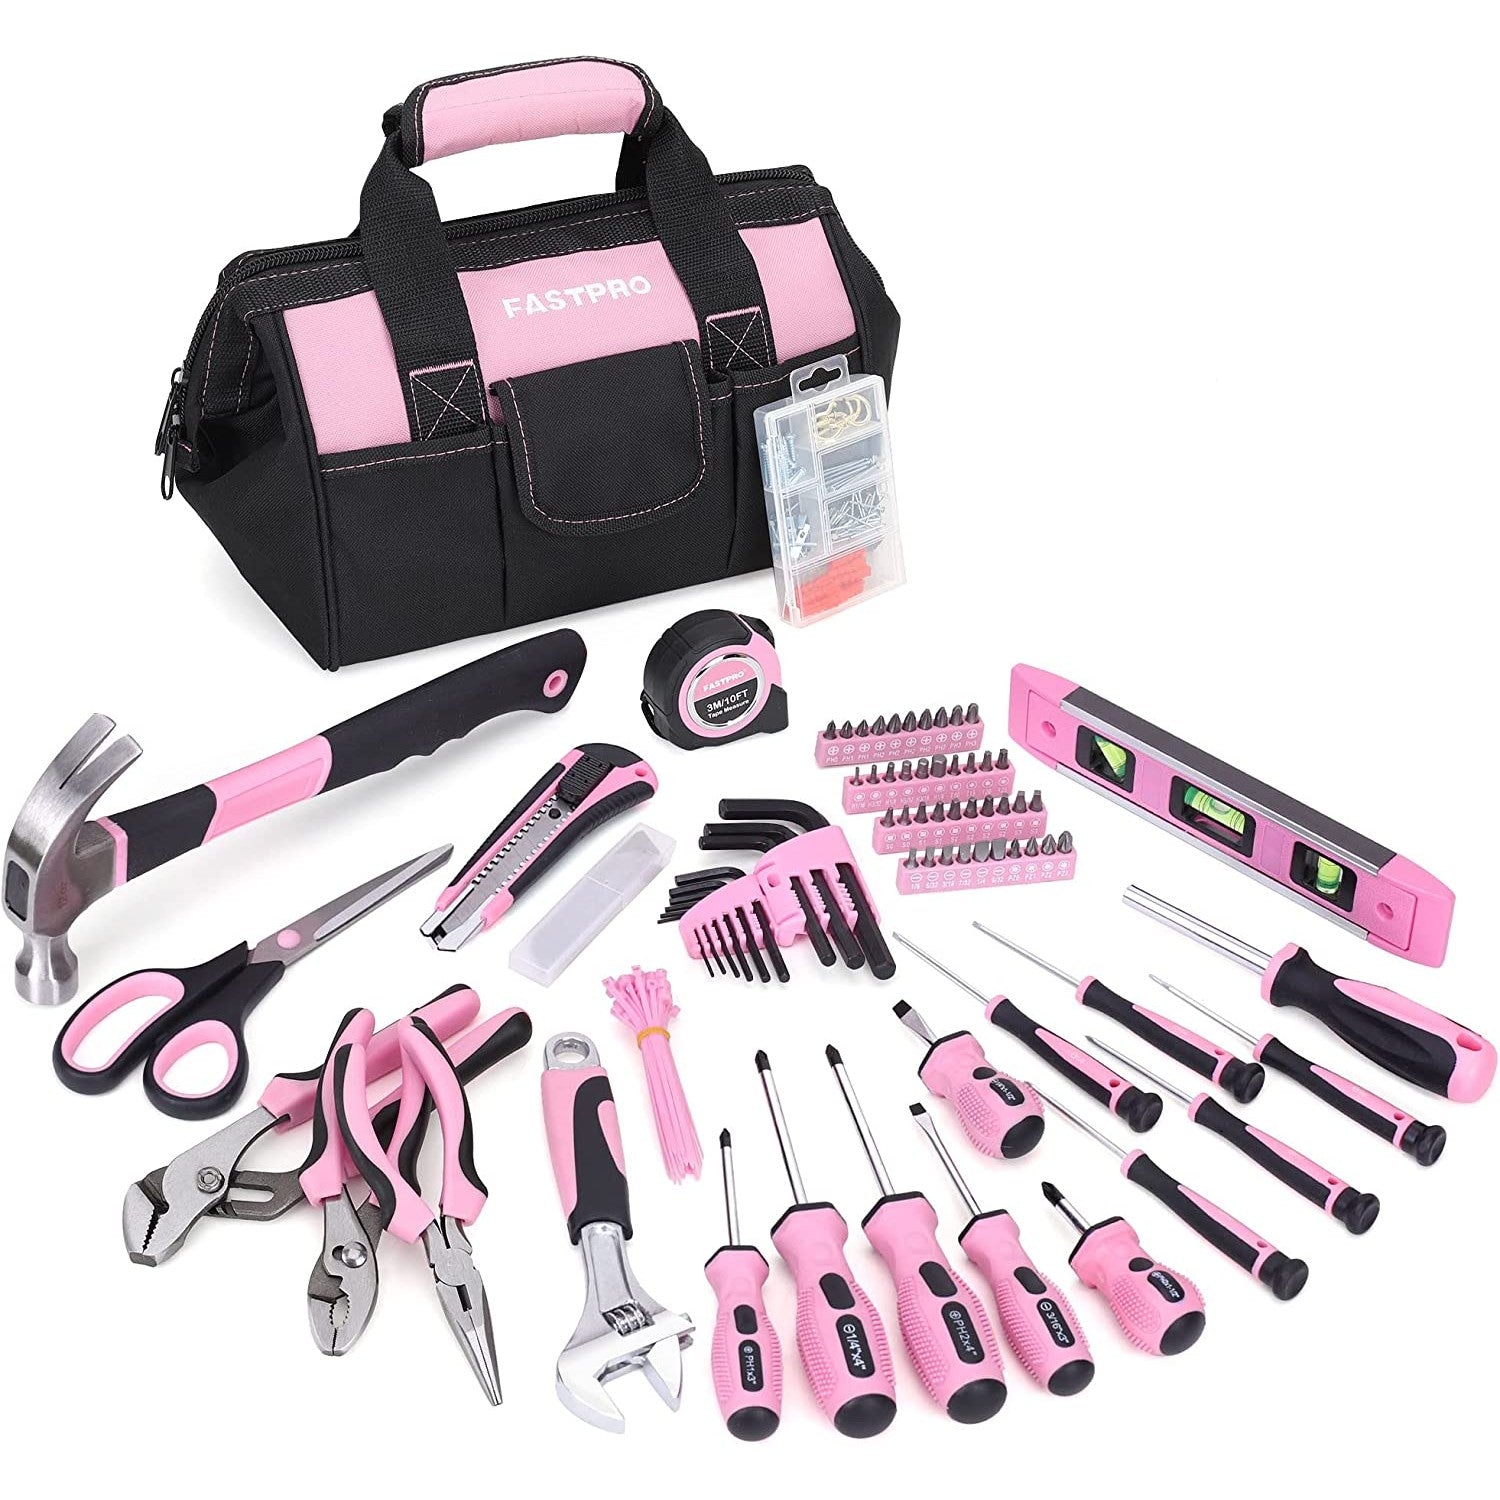 A ladies pink 220-piece tool set with a black and pink storage bag. Various pink and black tools are laid out in front of the bag.